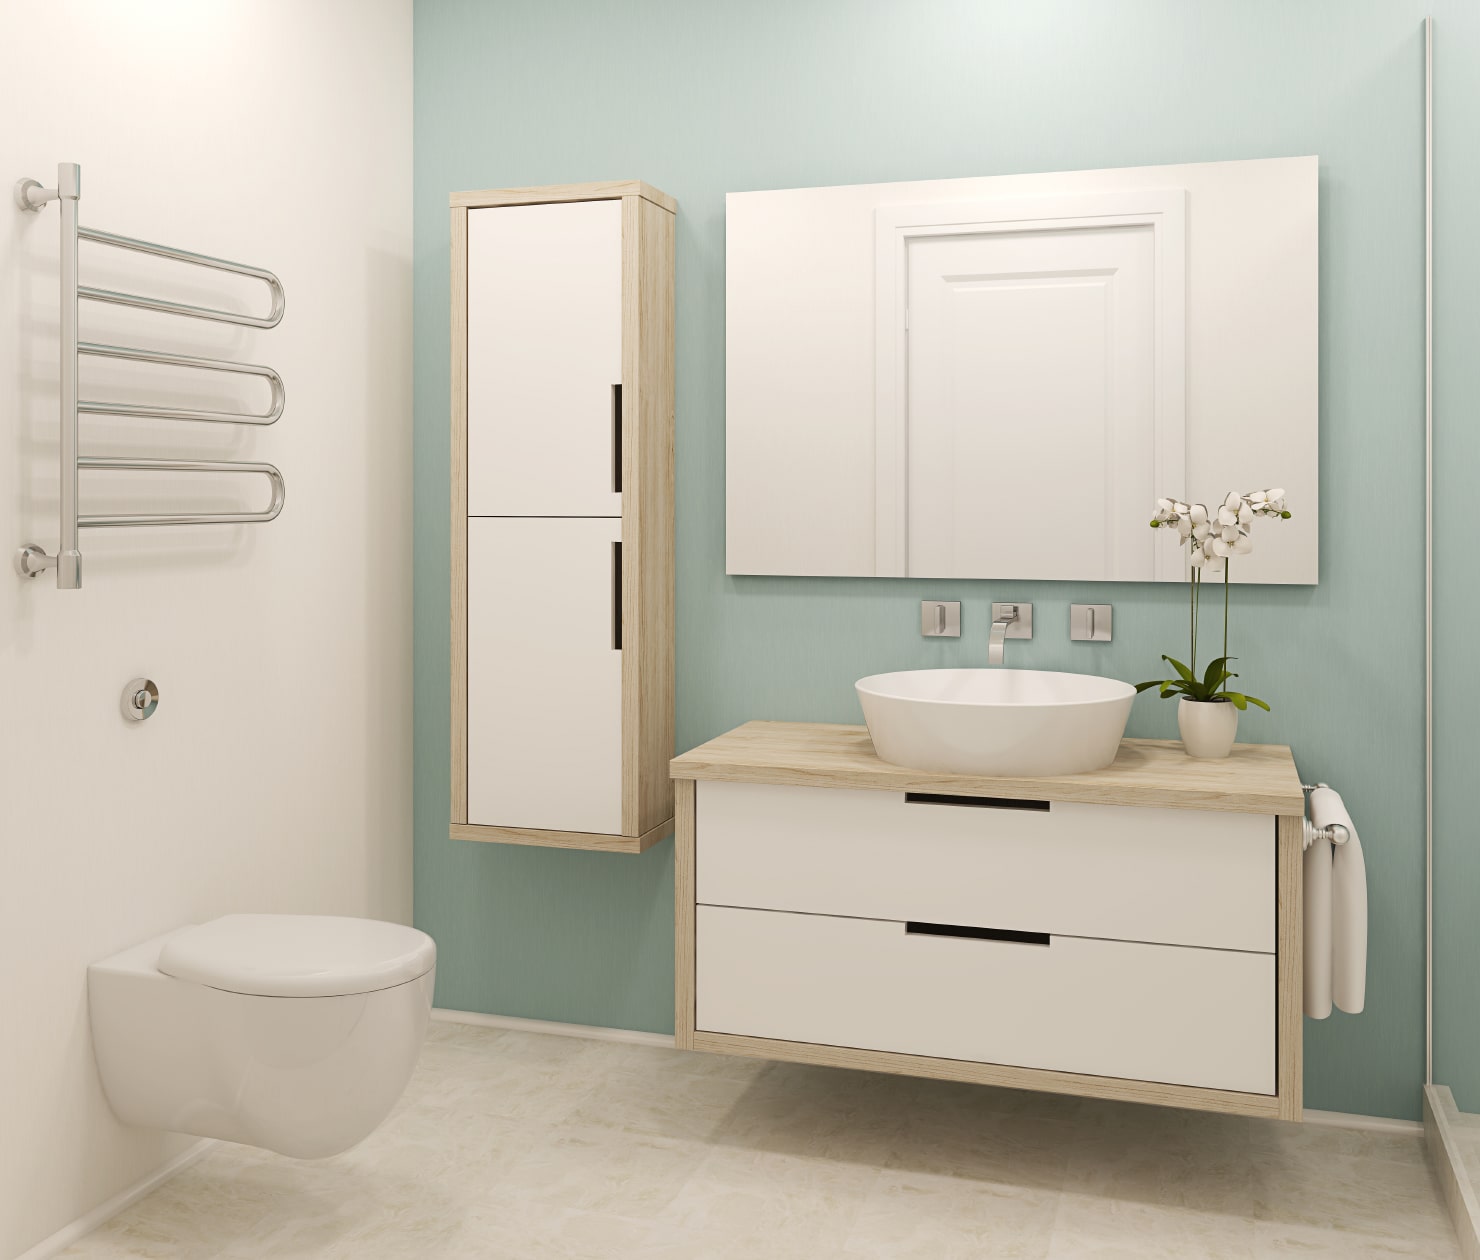 https://www.livehome3d.com/assets/img/articles/small-bathroom-ideas/bathroom-with-mounted-vanity@2x.jpg